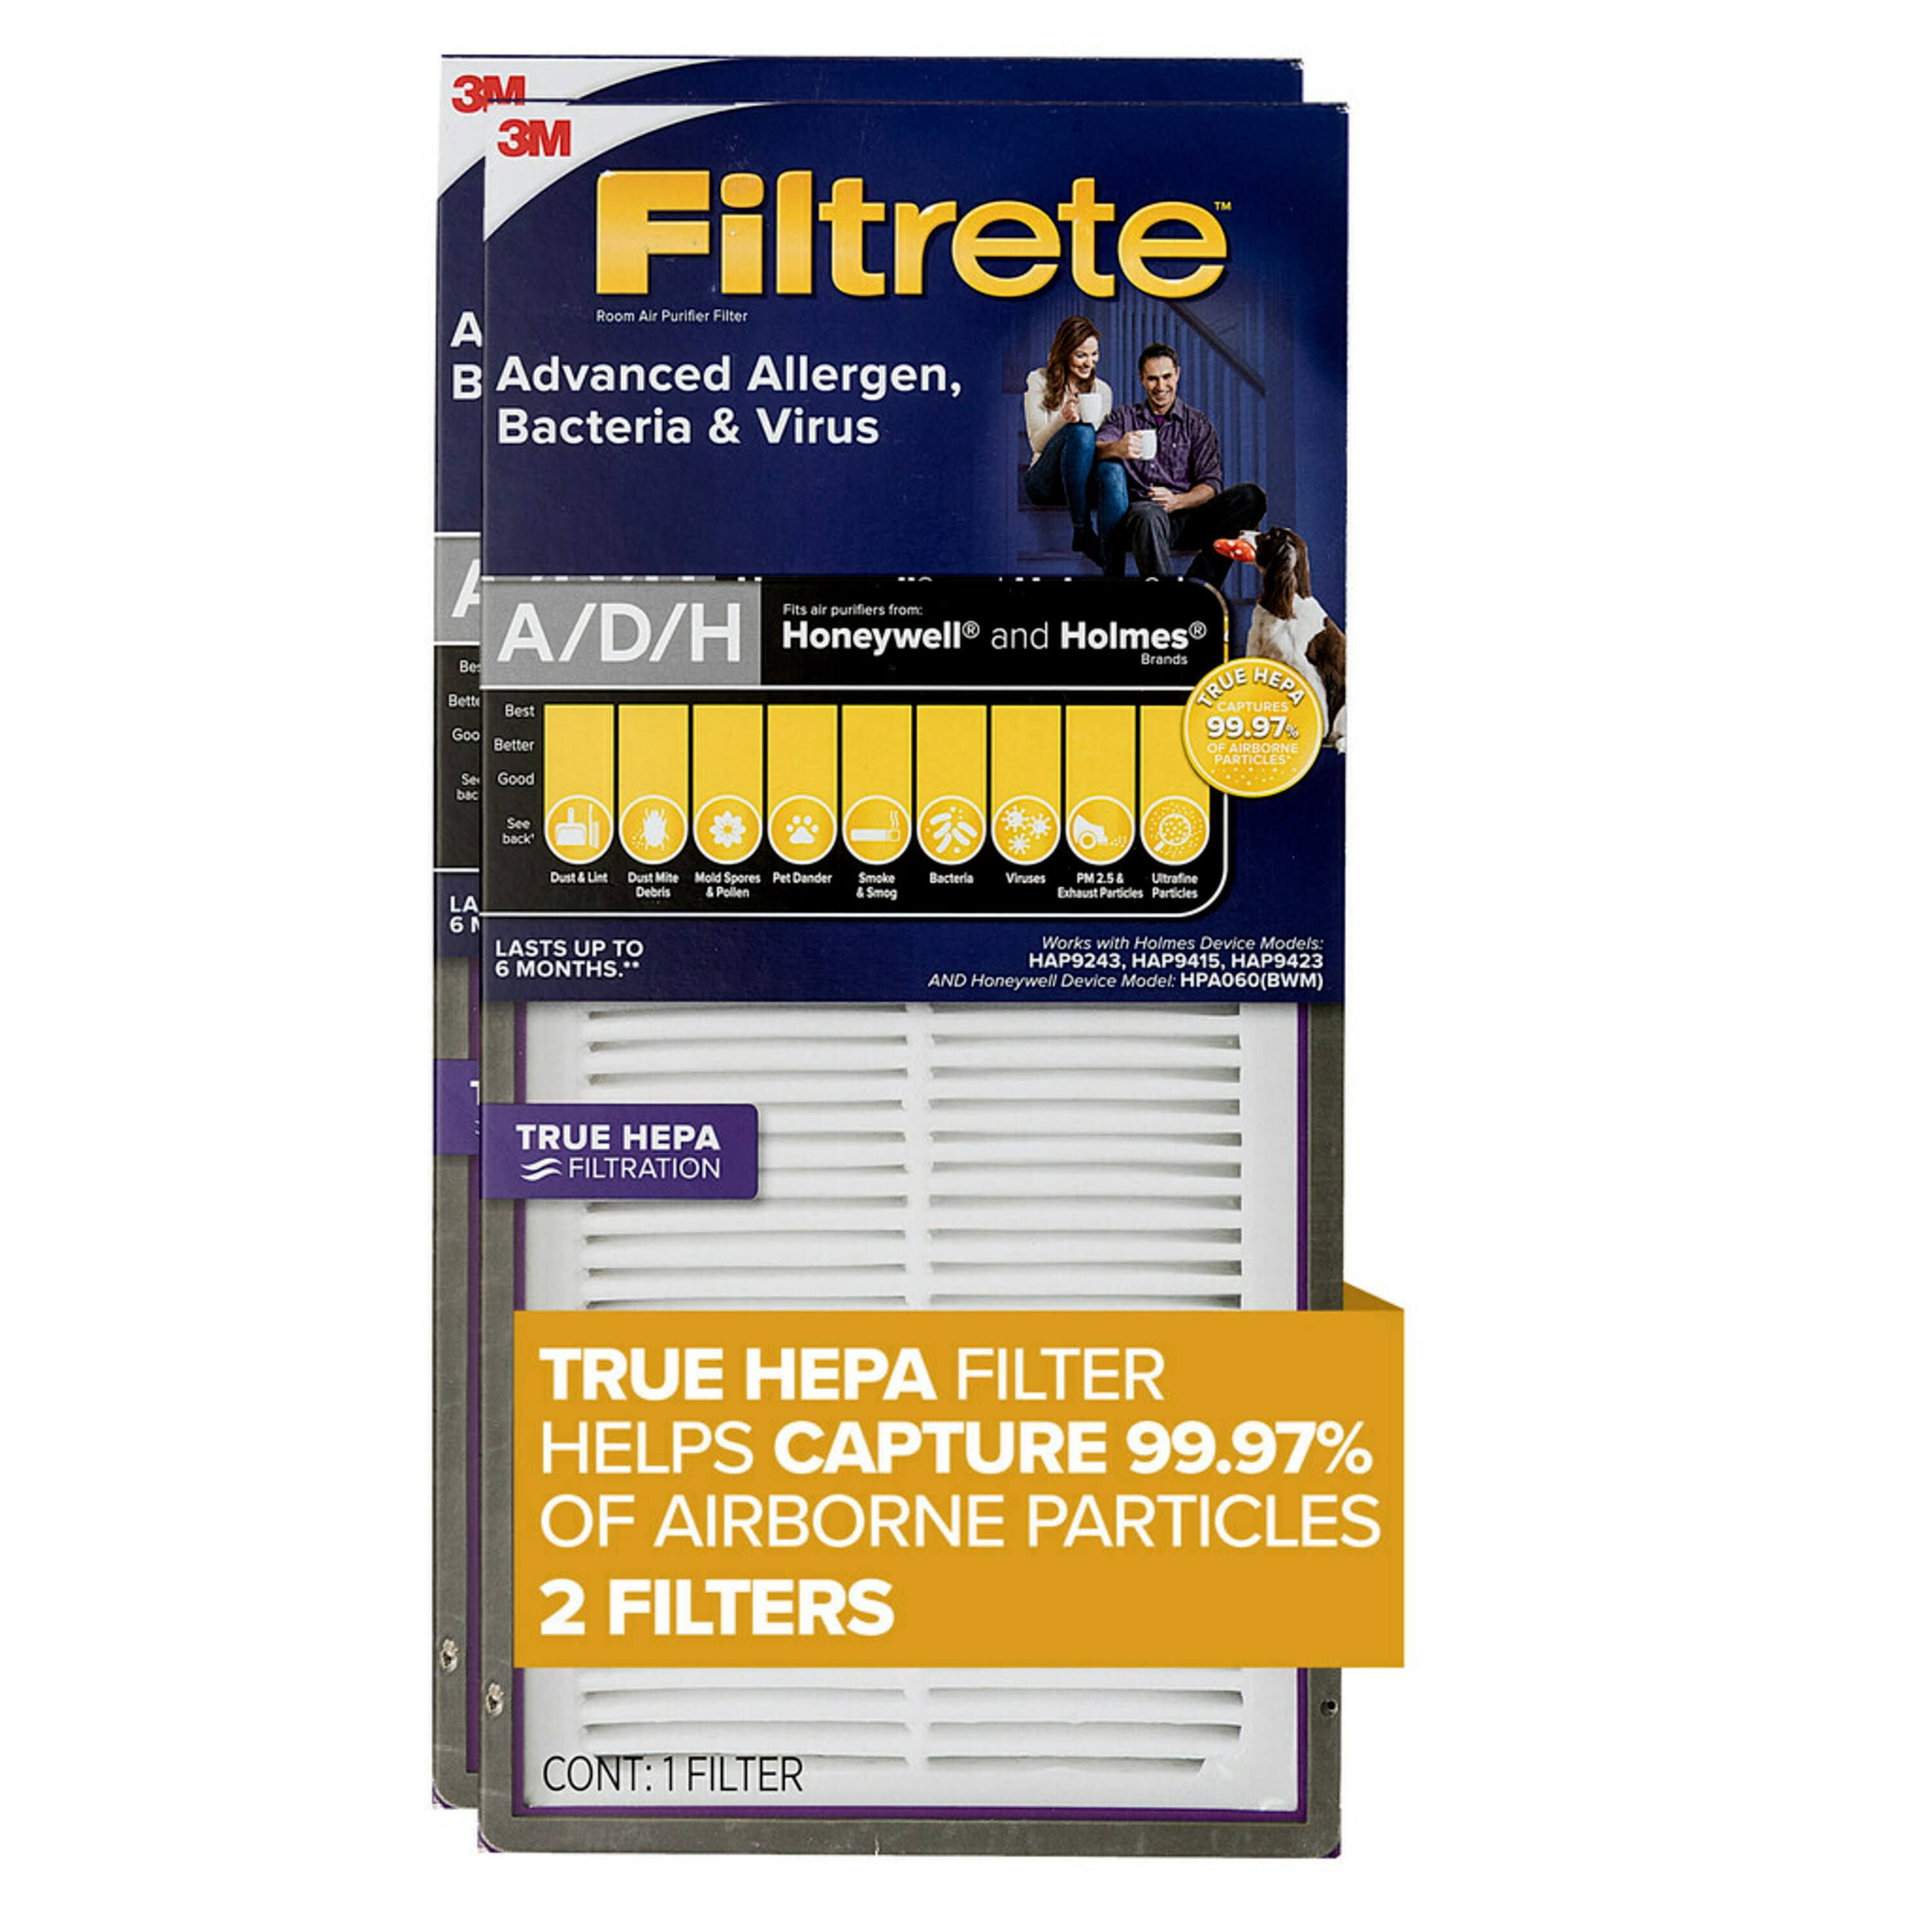 Filtrete by 3M Allergen, Bacteria & Virus True HEPA Air Purifier Filter, Replaces Size A/D/H Filters, 2 Pack